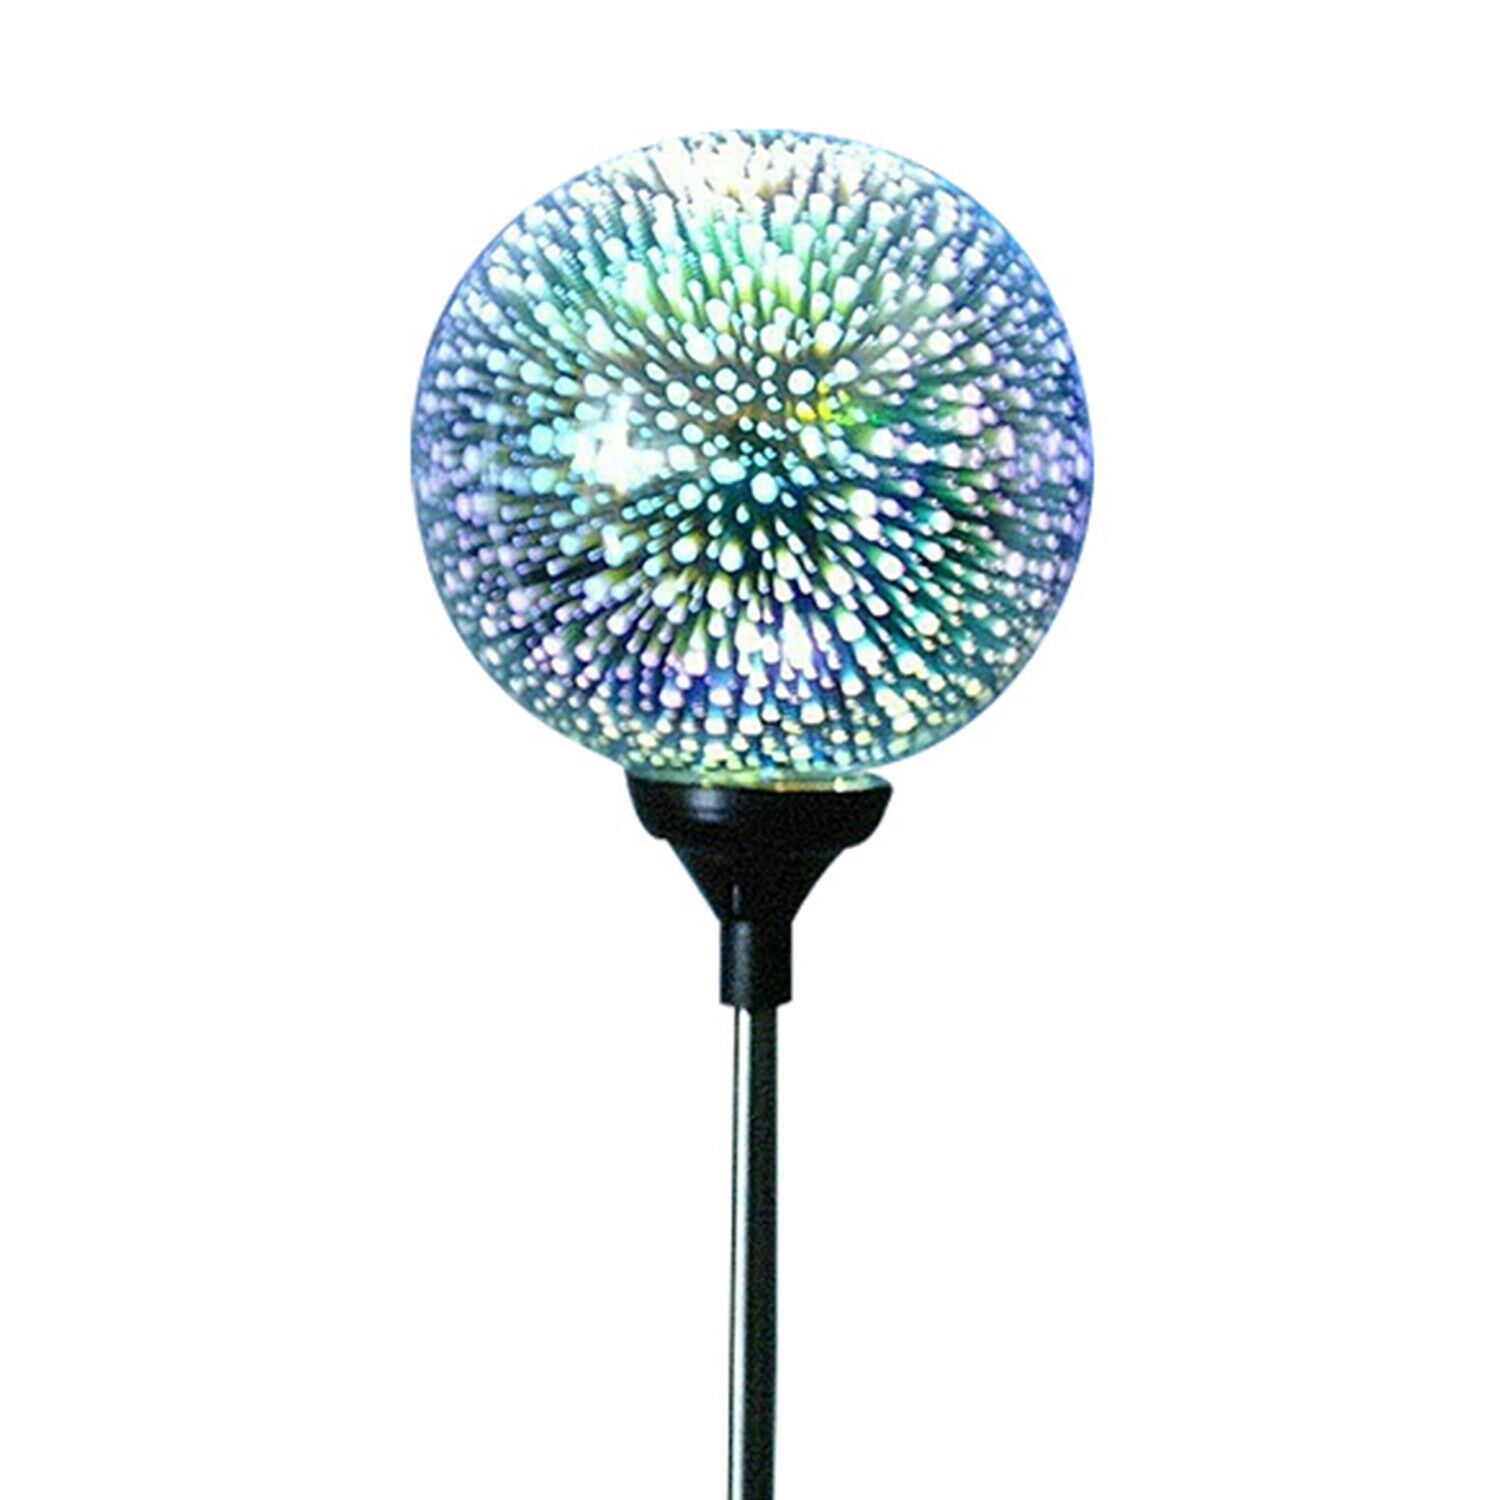 Haven Plastic Solar Garden 3D Globe Light Solar Panel Collects Sunlight to Charge Attractive look